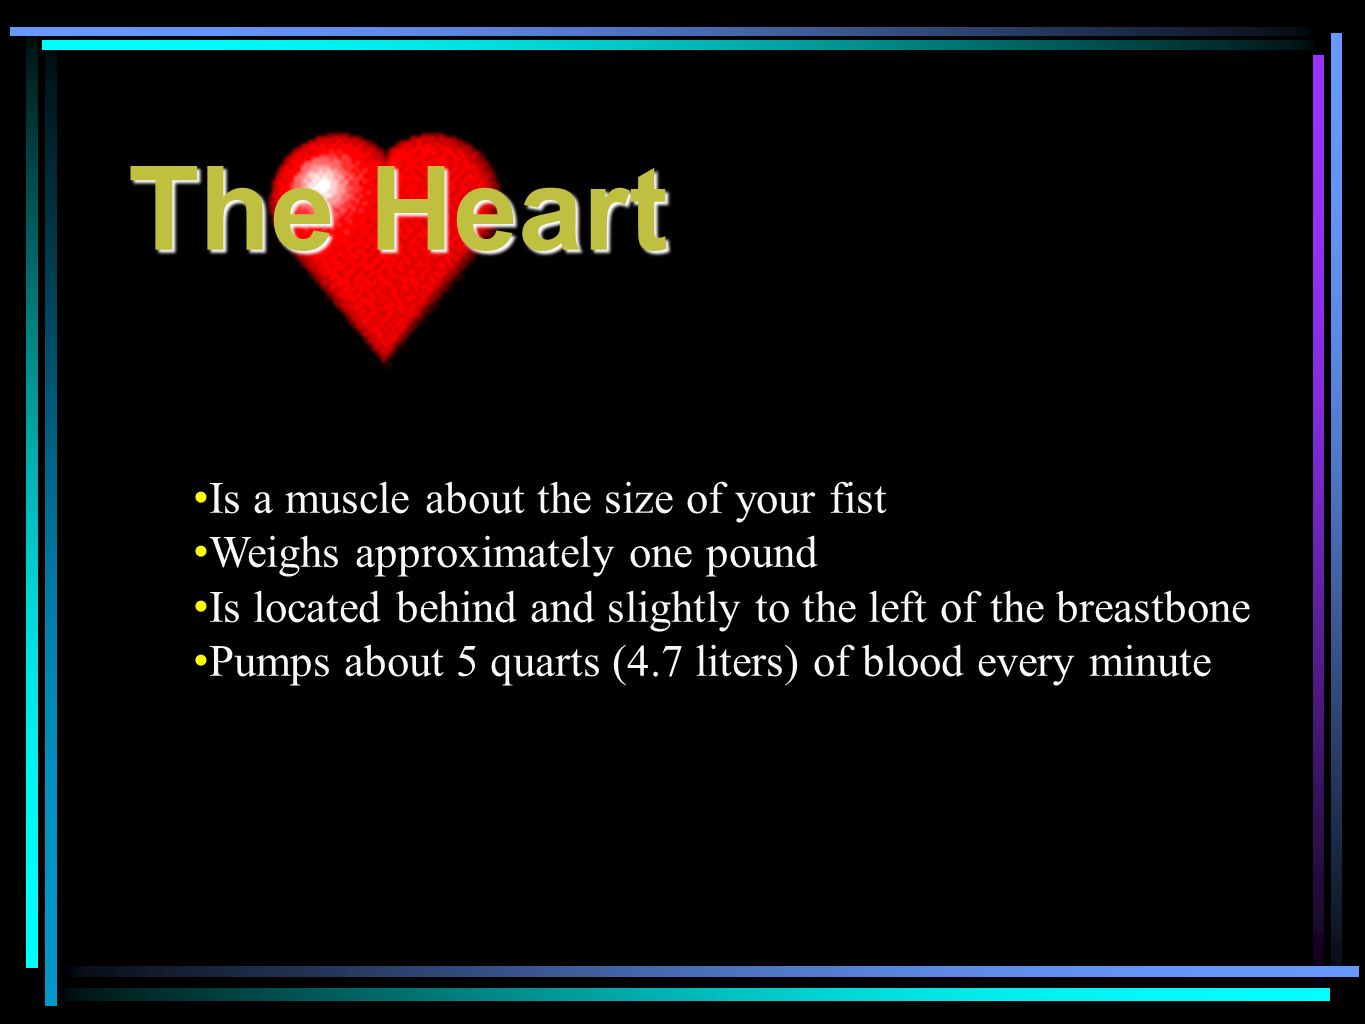 The Heart Is a muscle about the size of your fist Weighs approximately one pound Is located behind and slightly to the left of the breastbone Pumps about 5 quarts (4.7 liters) of blood every minute